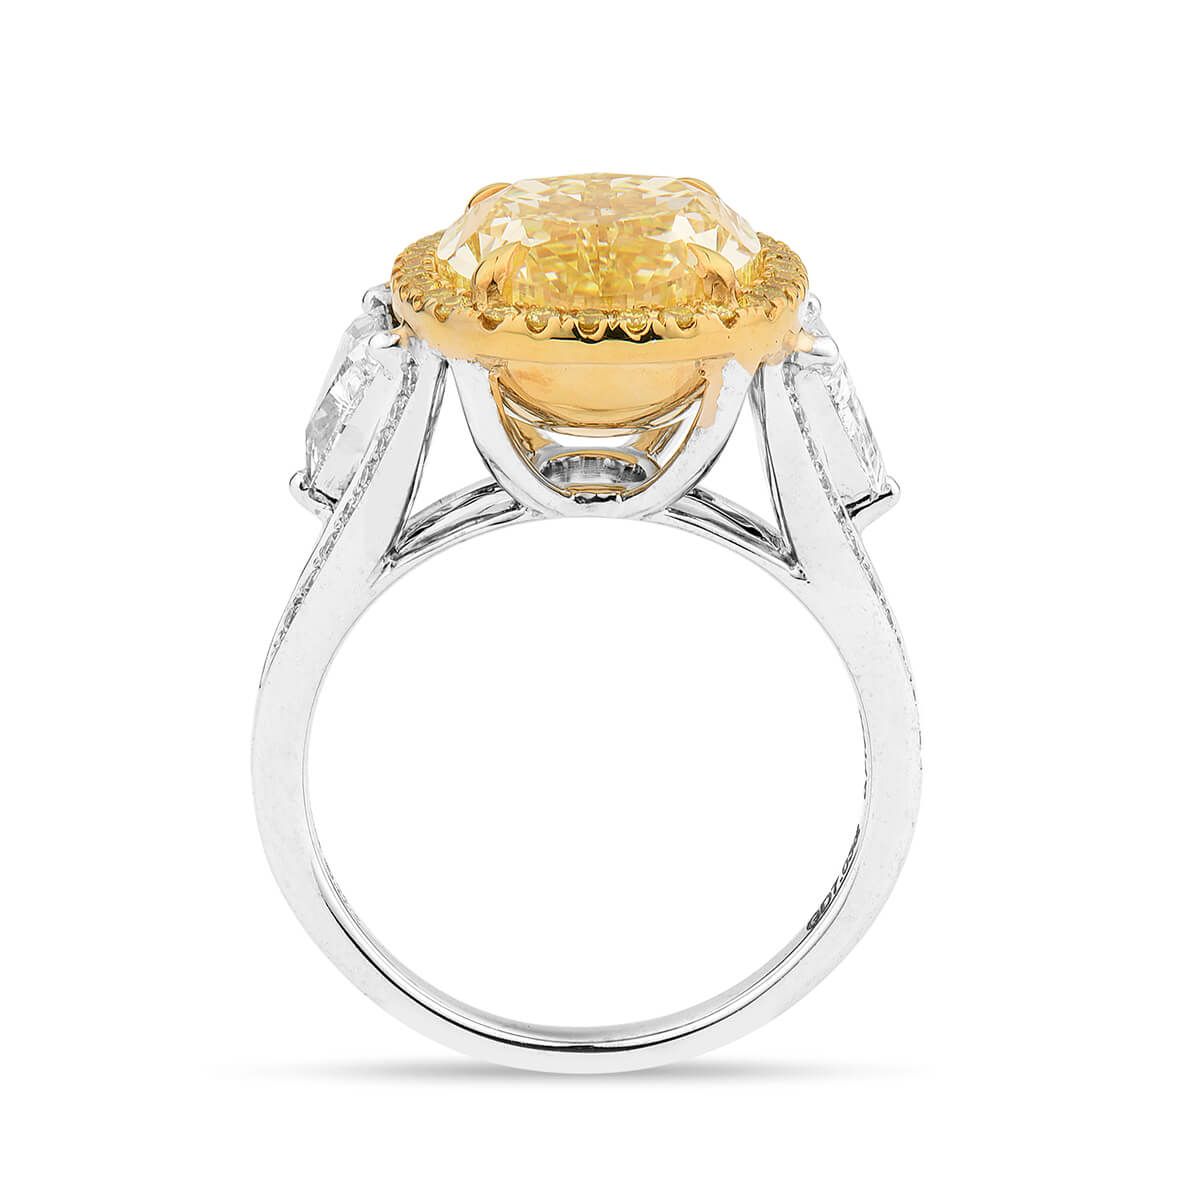 Fancy Yellow Diamond Ring, 7.03 Ct. (8.22 Ct. TW), Oval shape, GIA Certified, 2185059309